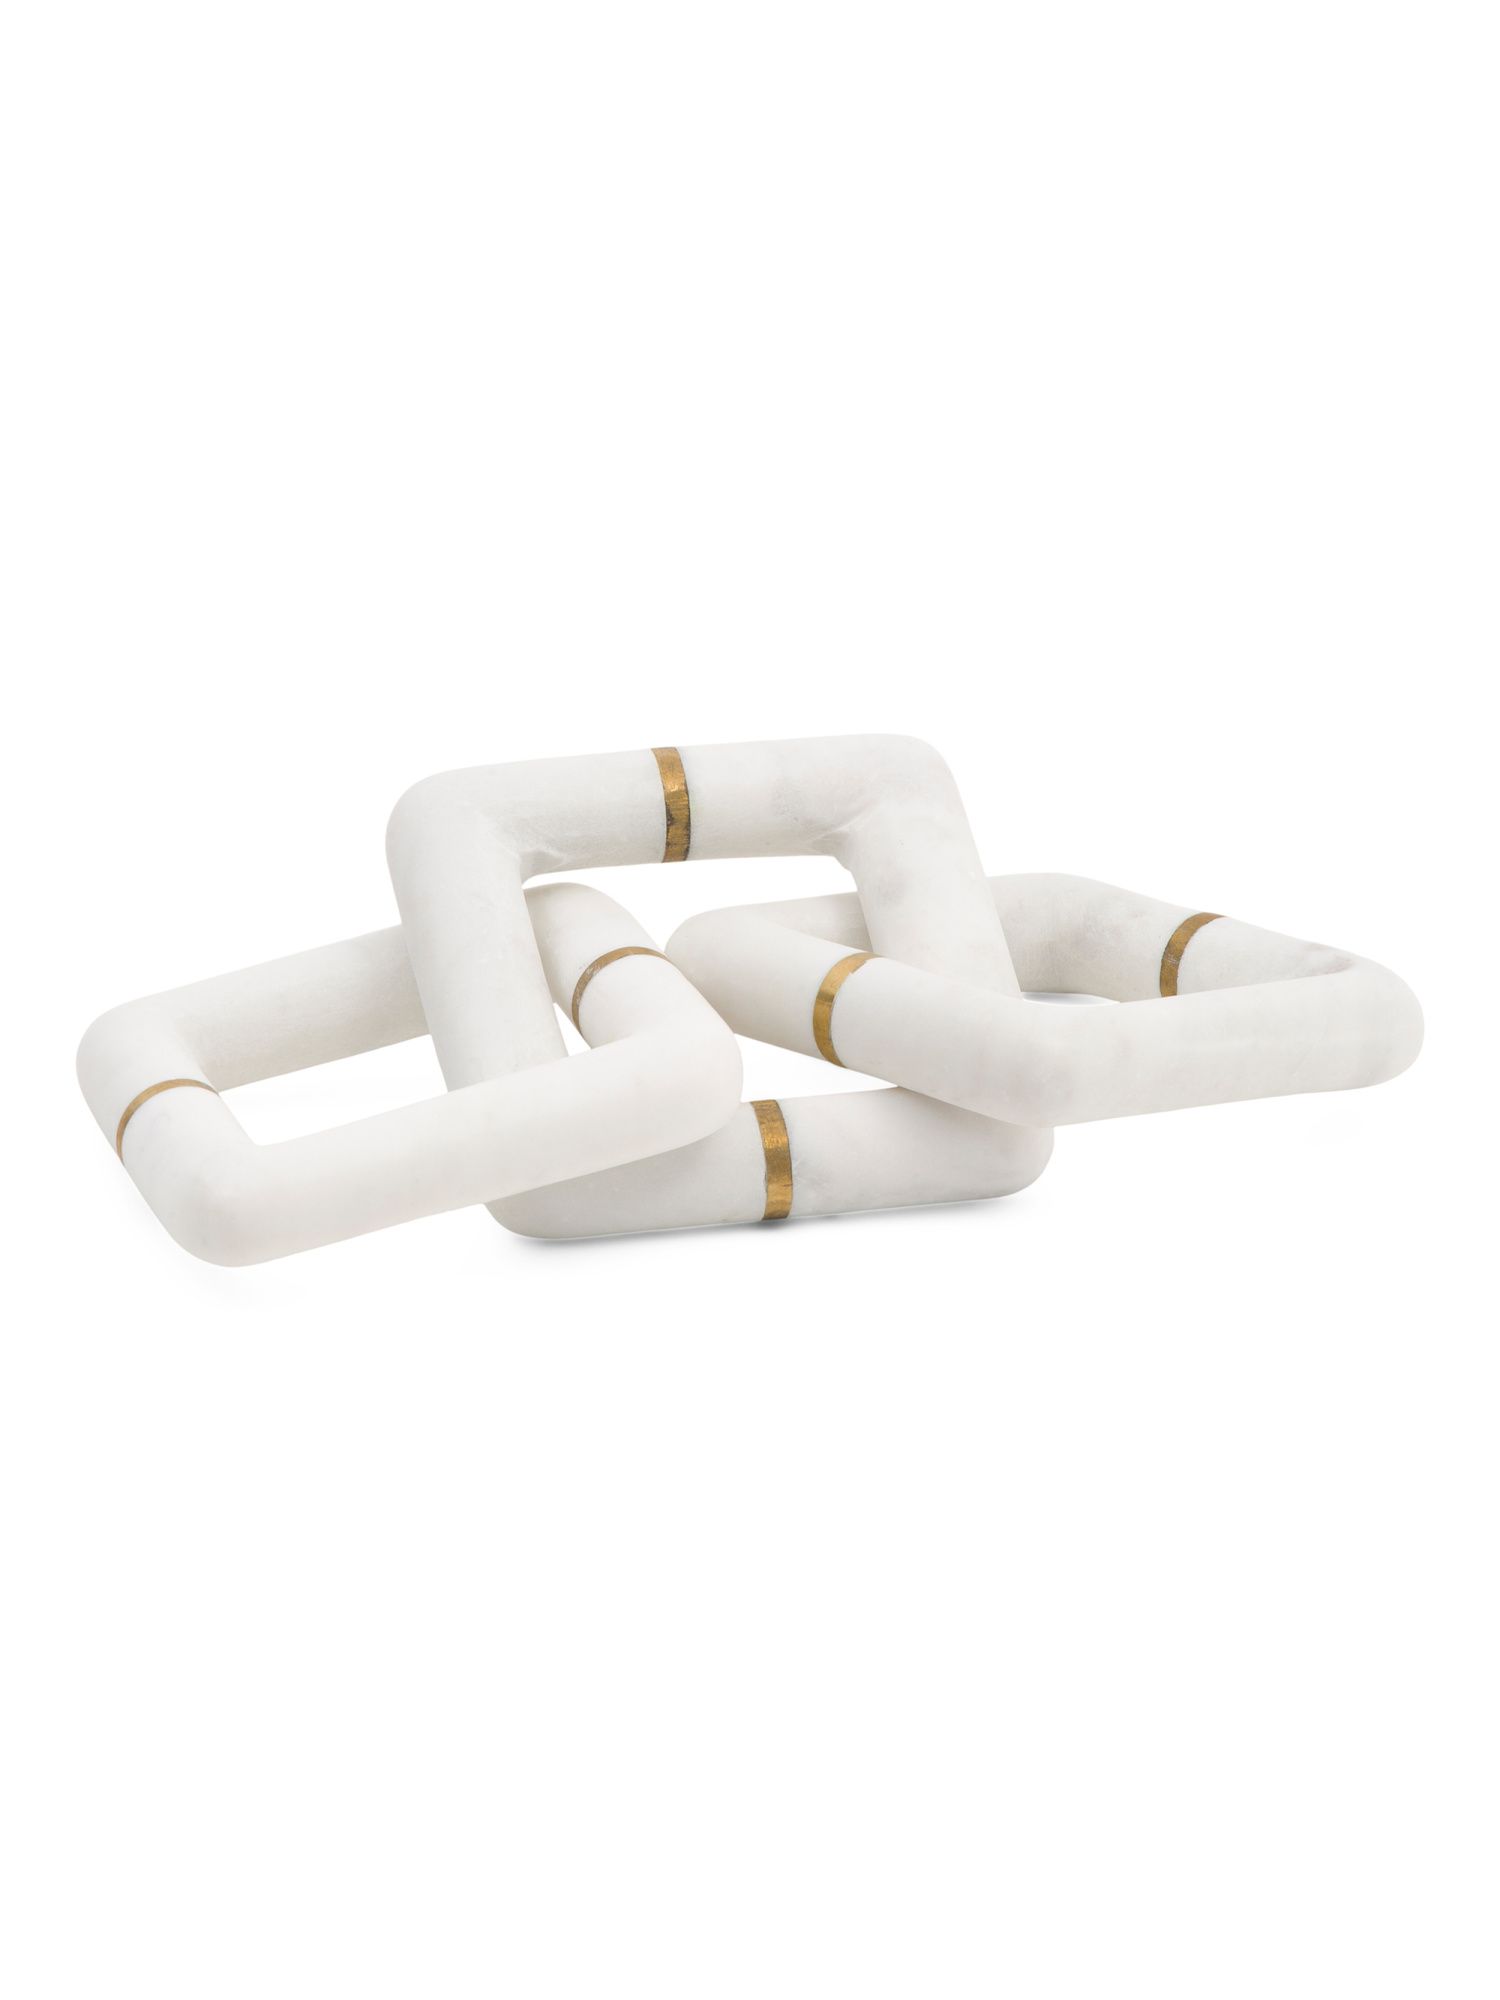 14x5 Marble Square Chain Link With Brass Inlay | TJ Maxx